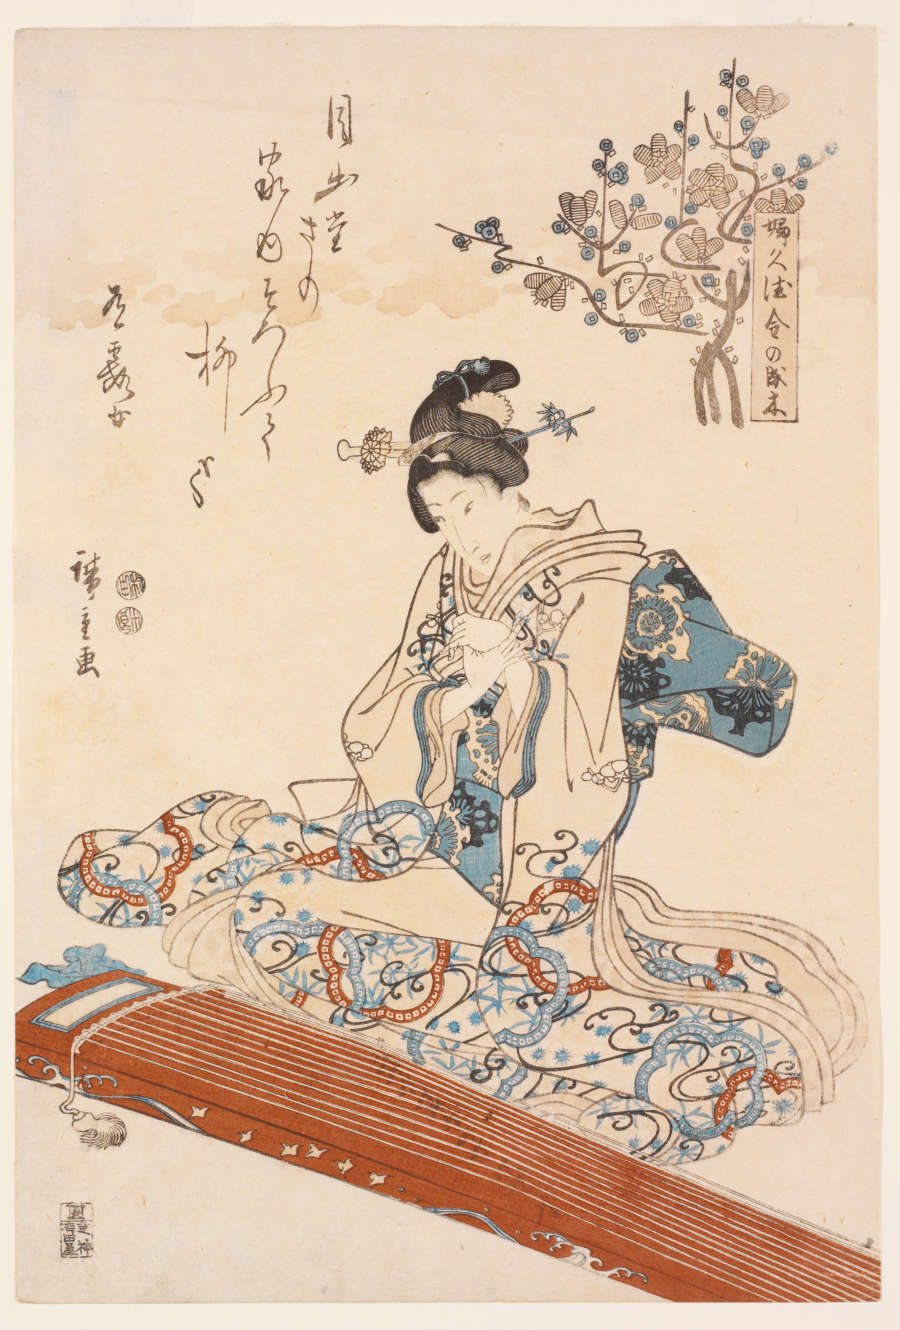 A seated woman in a robe of swirling blue and red designs preparing to play a thirteen-stringed zither. Above her is a poem and a tree with blossoms made of coins.